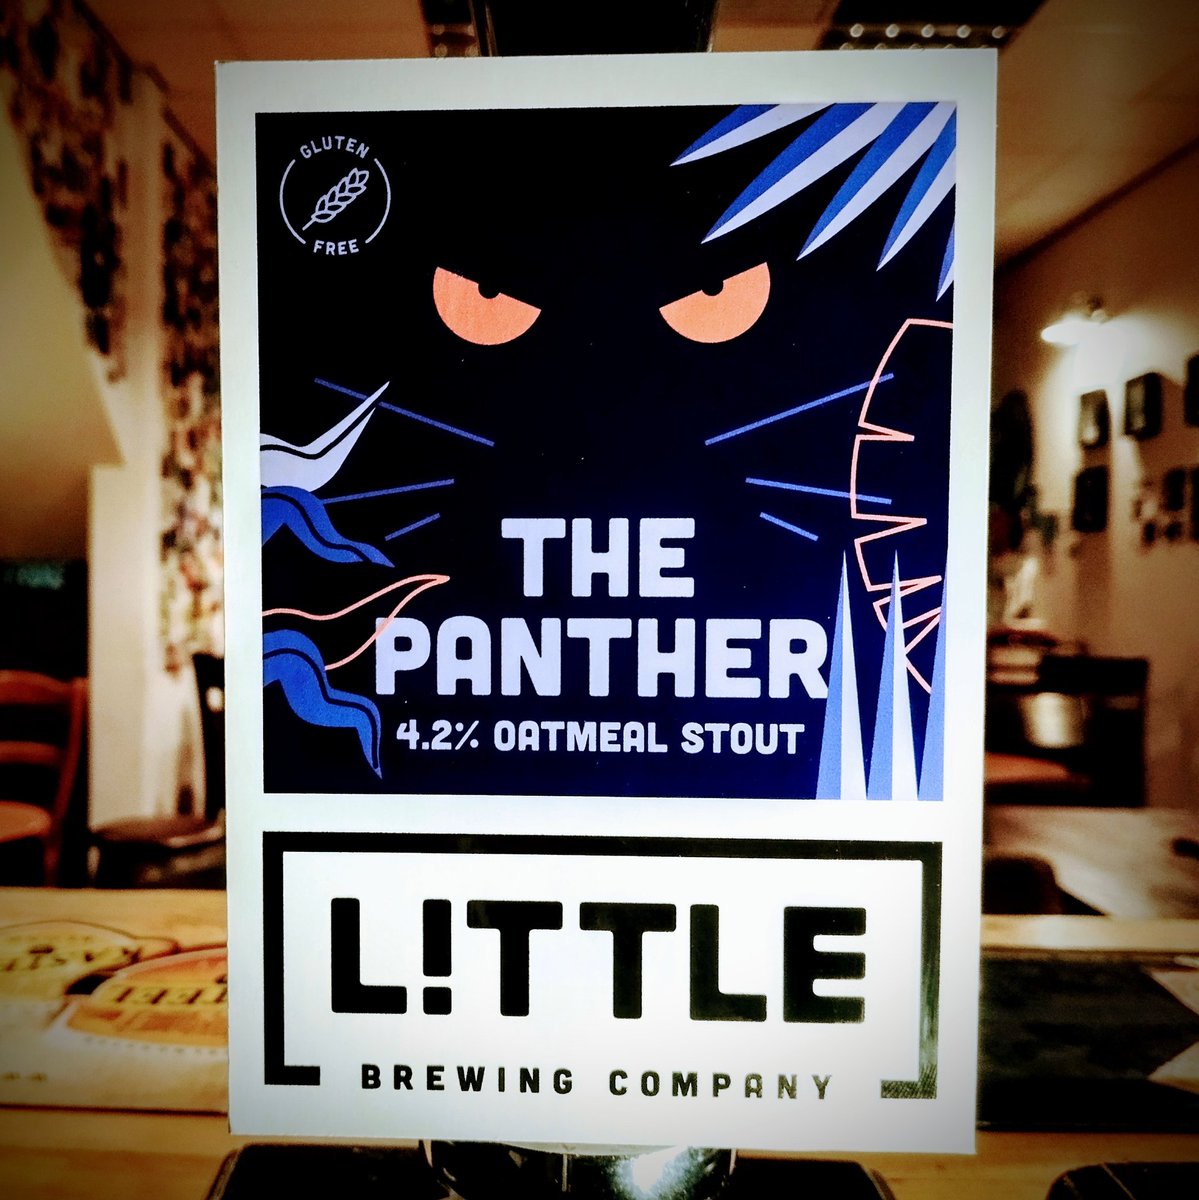 Back tonight after our usual Bank Holiday skive! New cask stout on the pumps from Little Brewing - dark, smooth and tasting bigger than it's 4.2% abv. It's another gluten-free beer too, giving us two beers for the celiacs on draught at the moment! Open at 4pm 👍 #colwynbay #pub